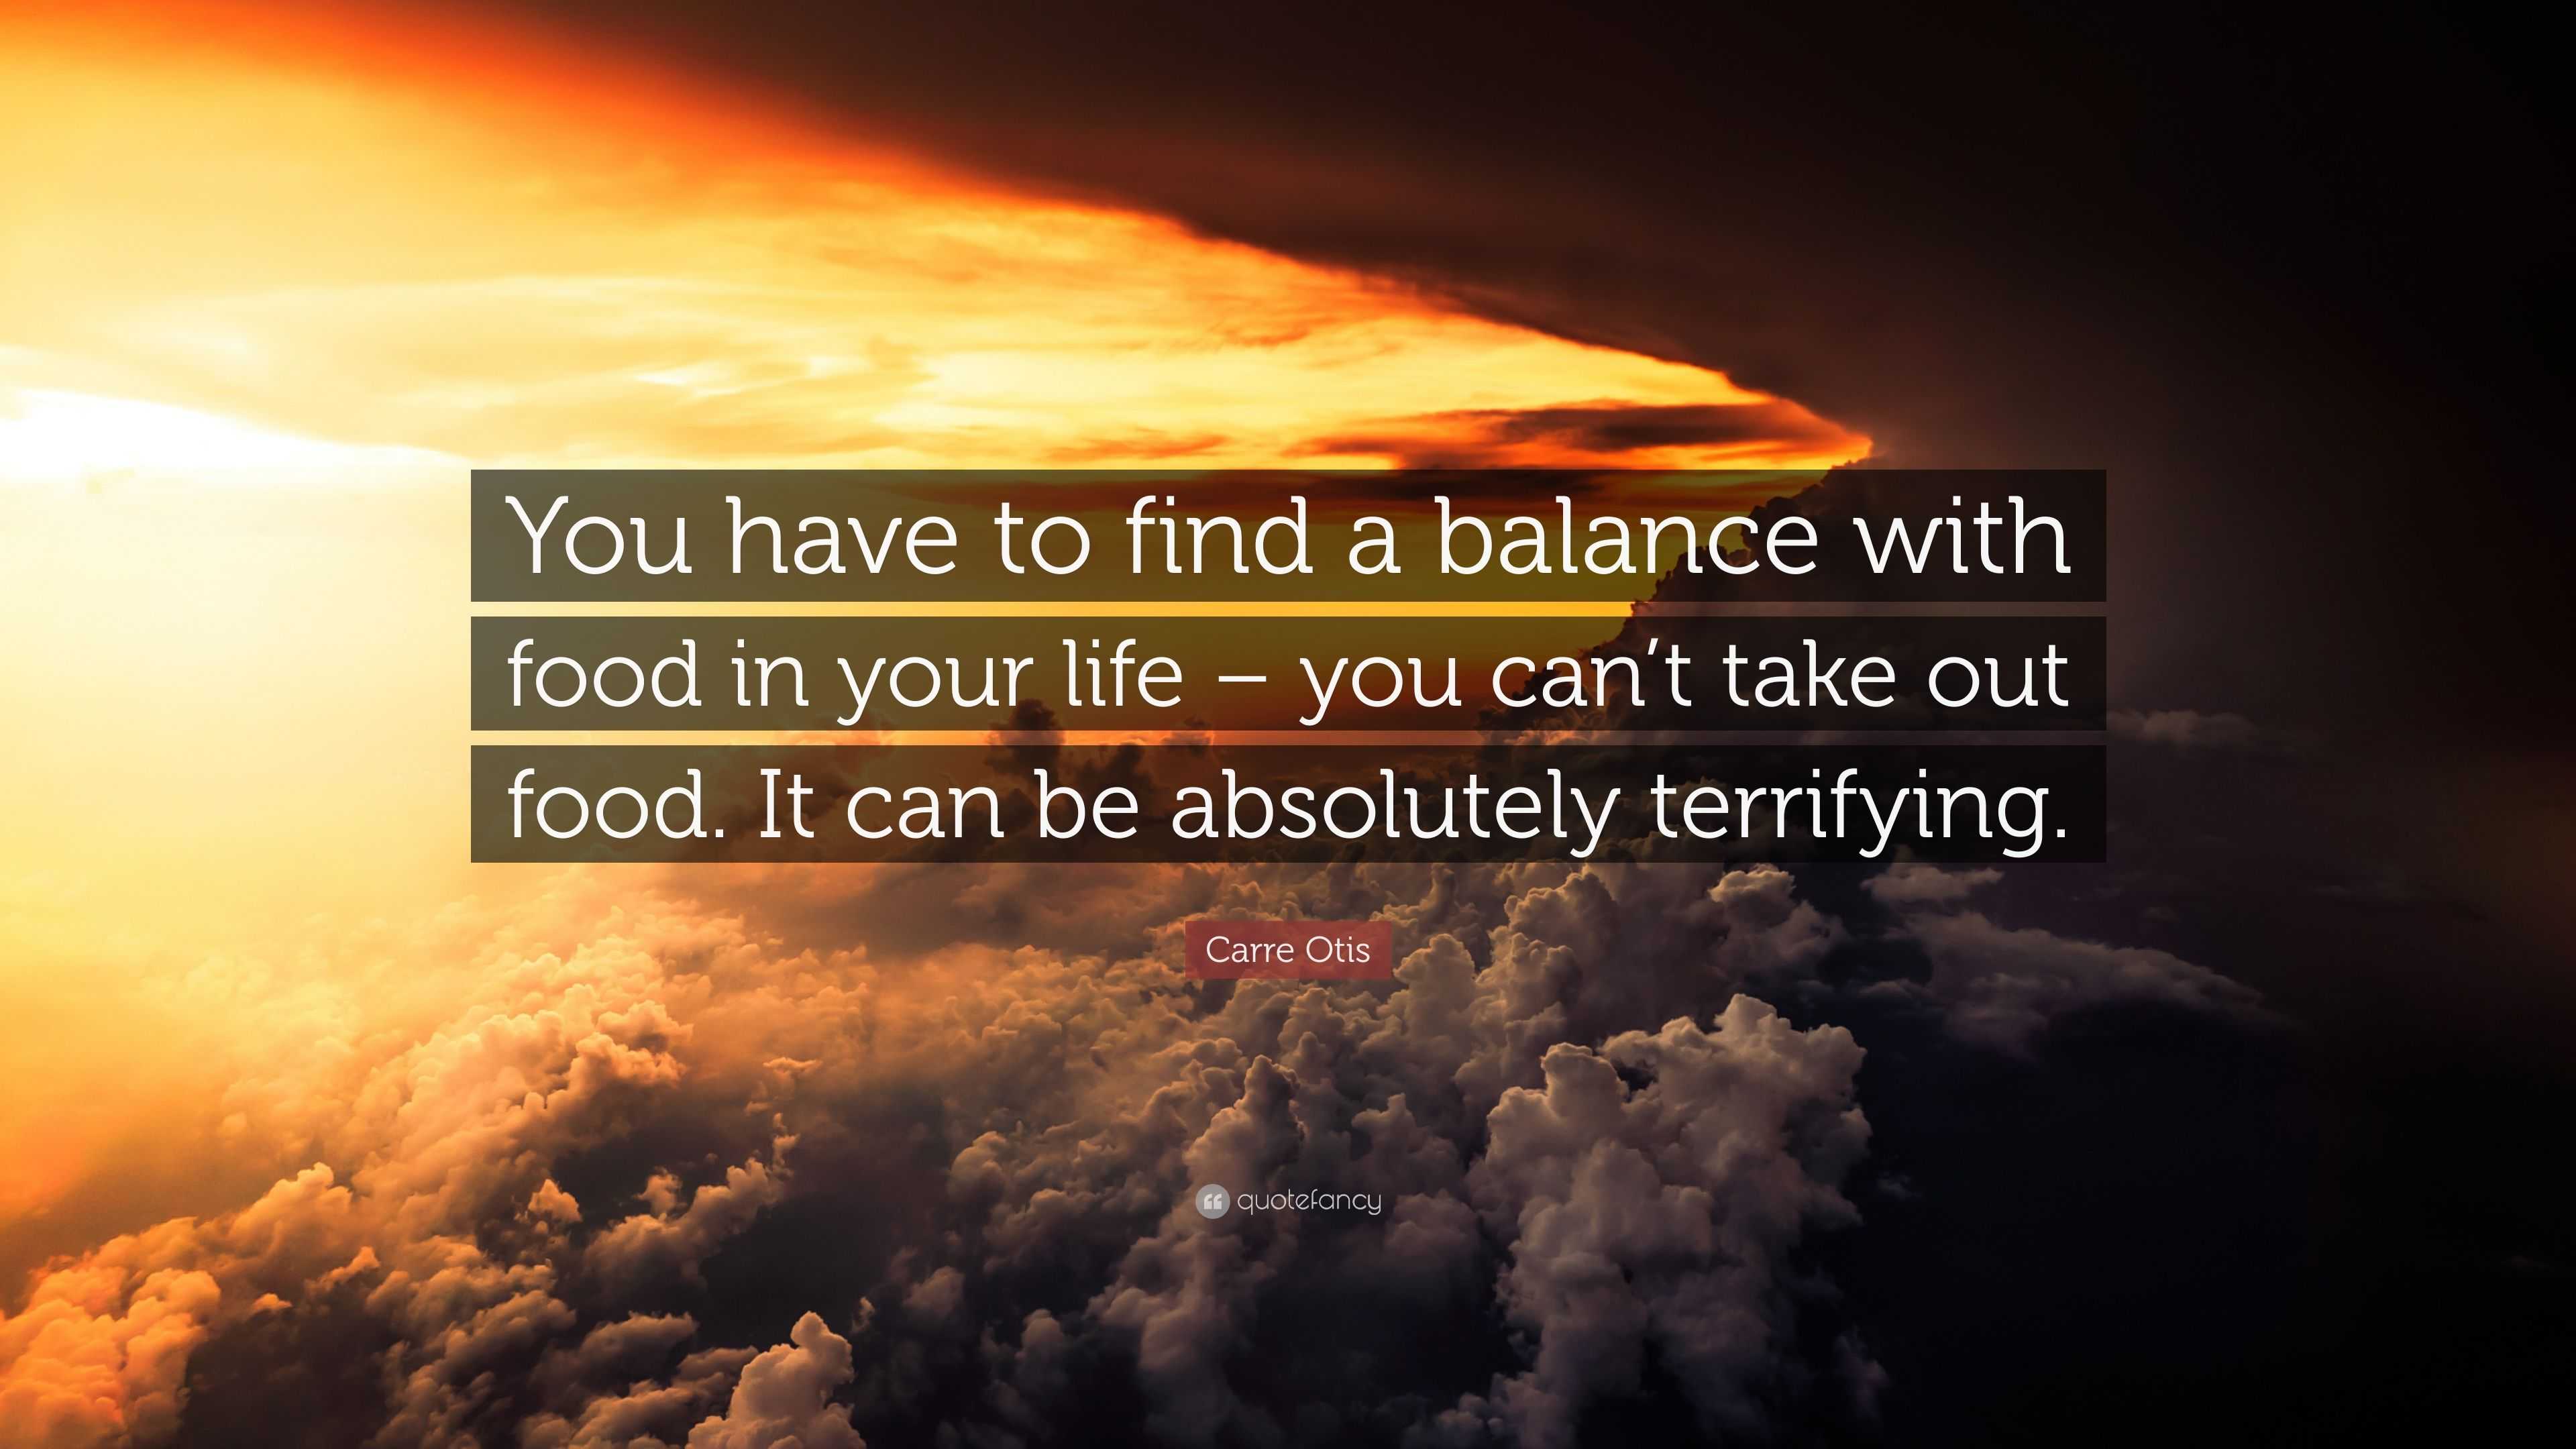 The Best Way to Find Balance in Your Life